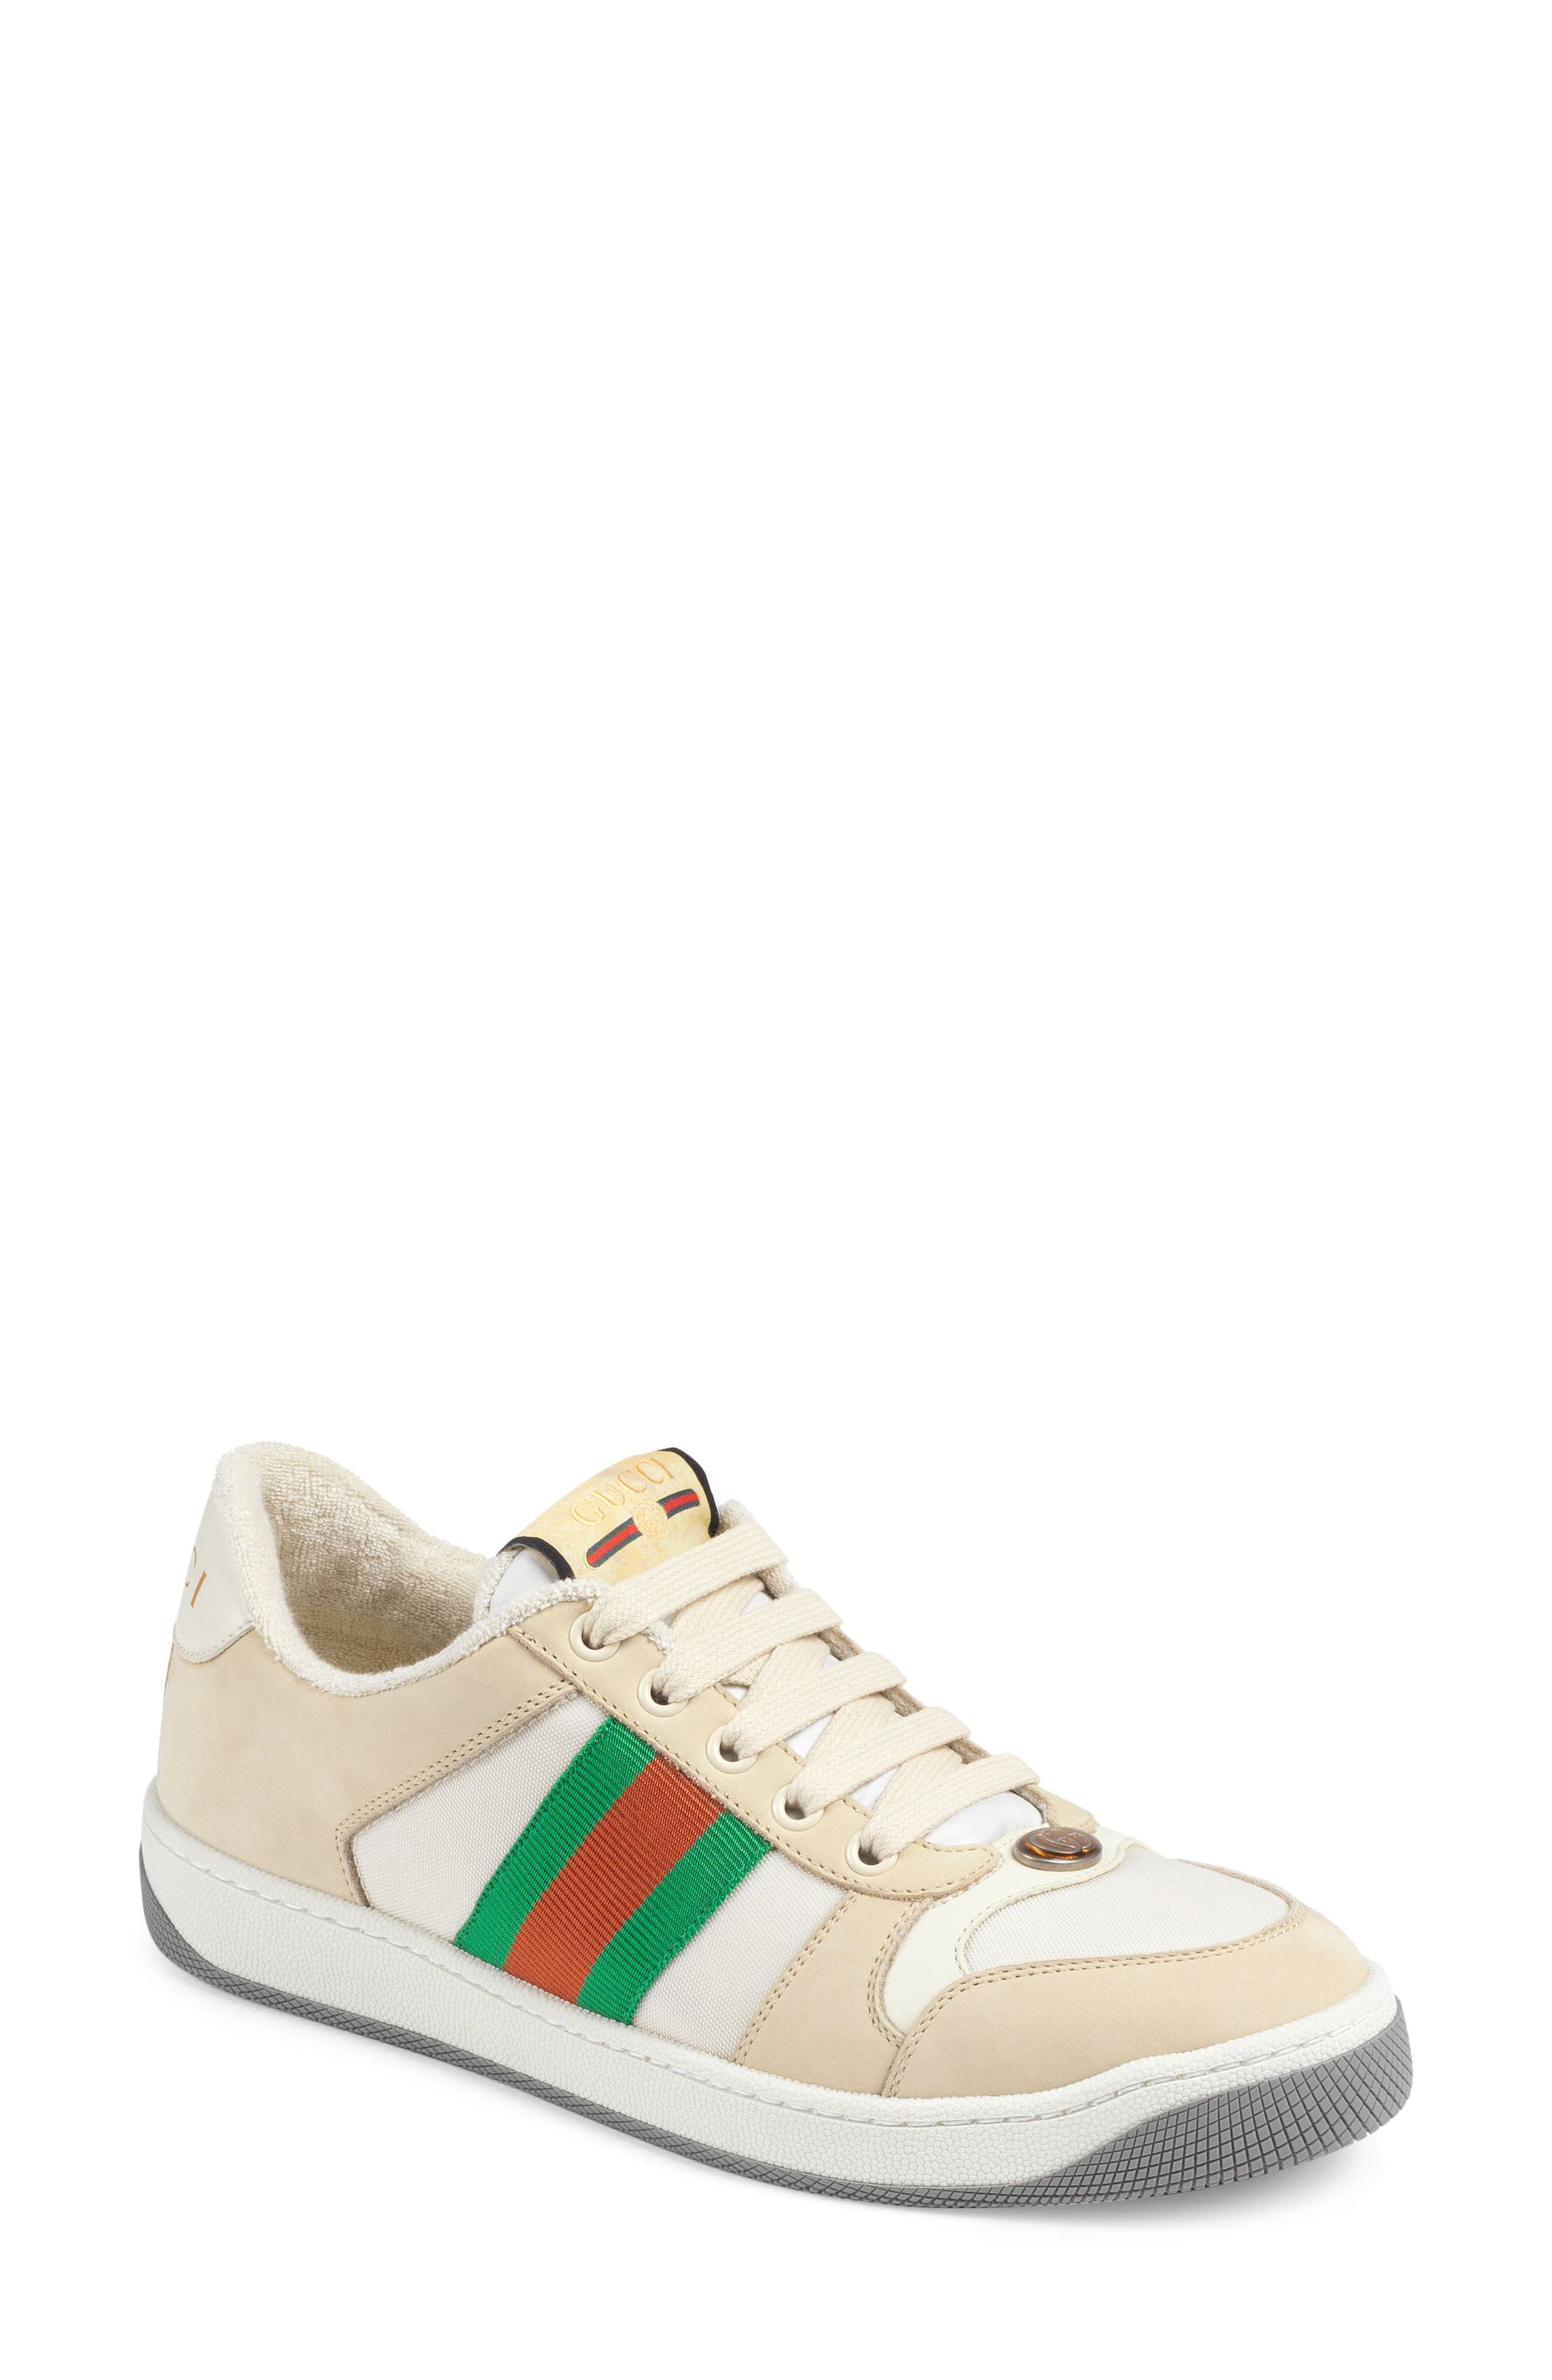 gucci rubber shoes for ladies